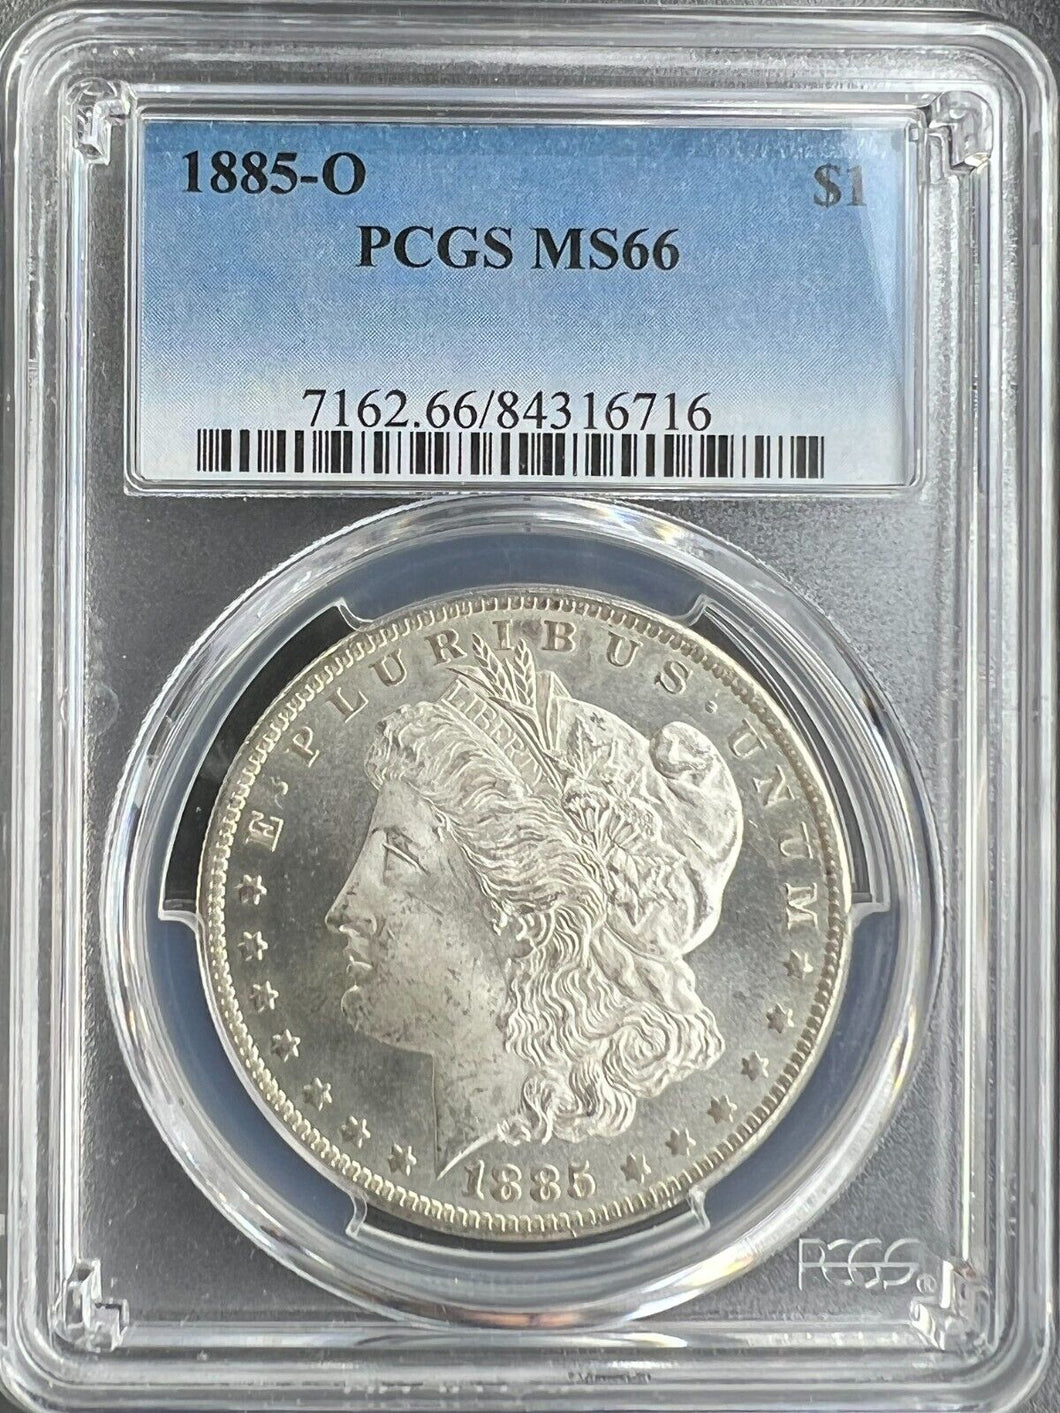 1885-O Morgan Silver Dollar PCGS MS66  -  Beautiful Blast White & Frosty Devices